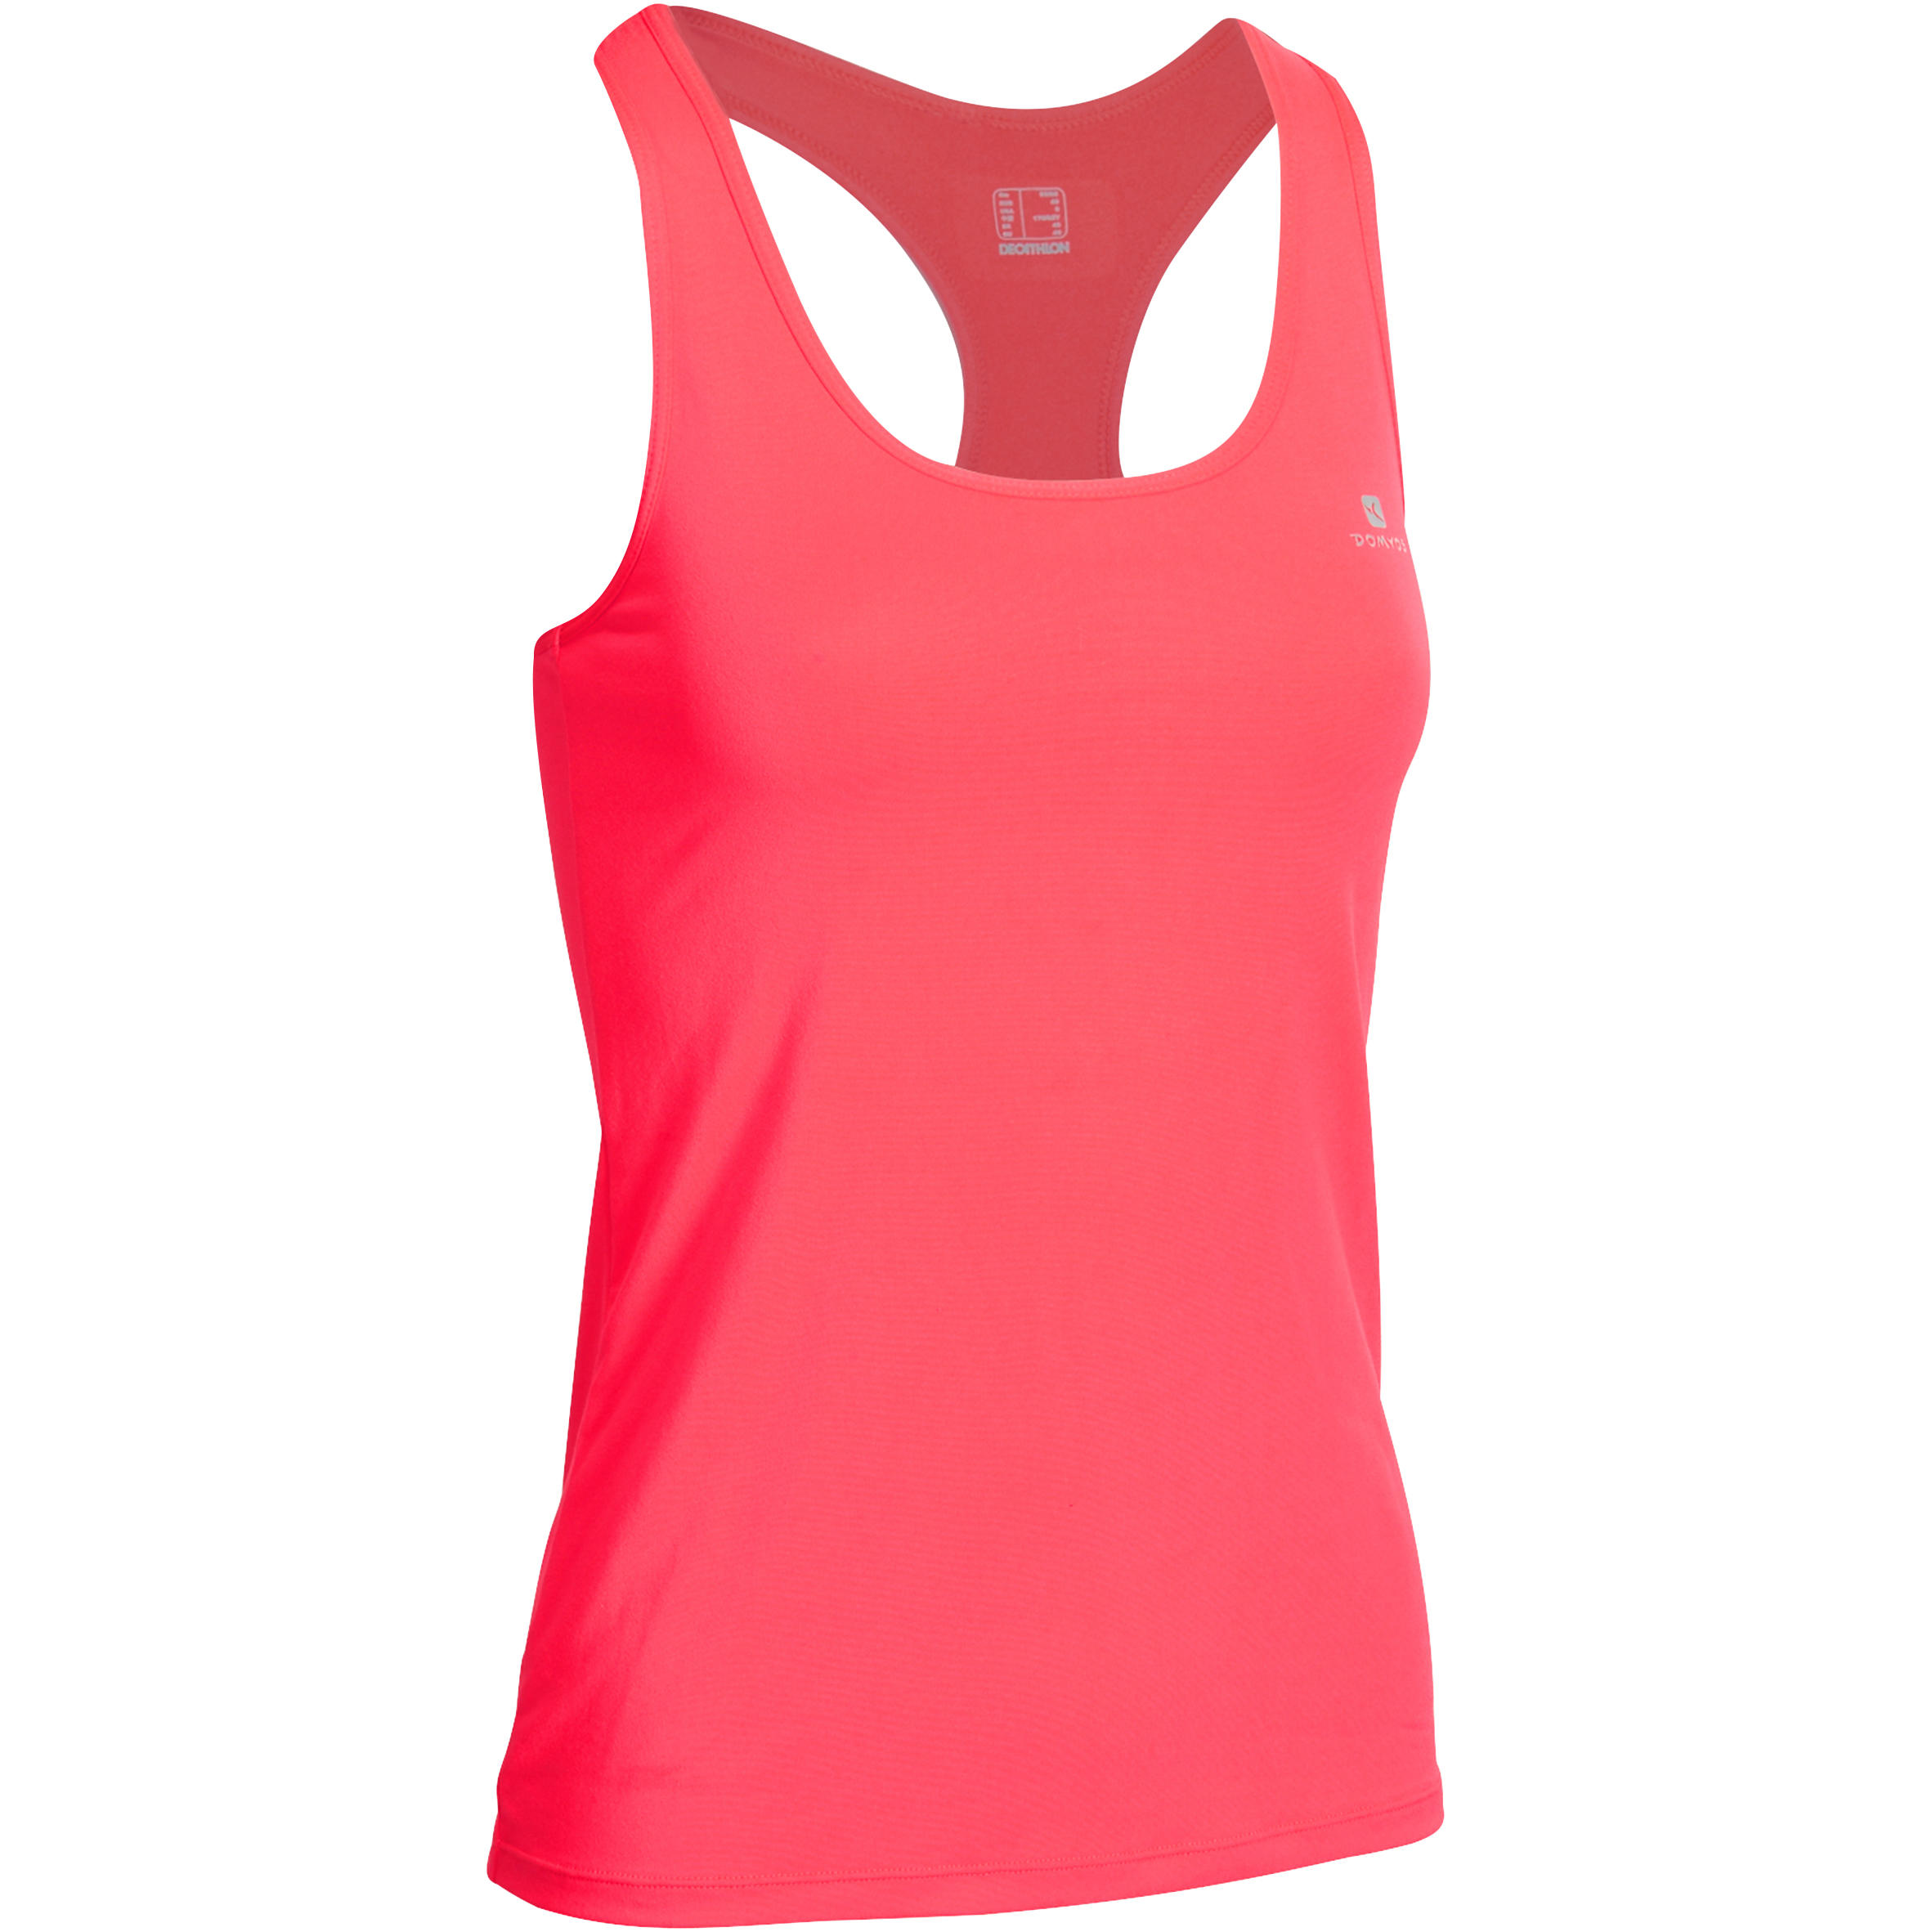 DOMYOS My Top Women's Fitness Tank Top - Pink/Red